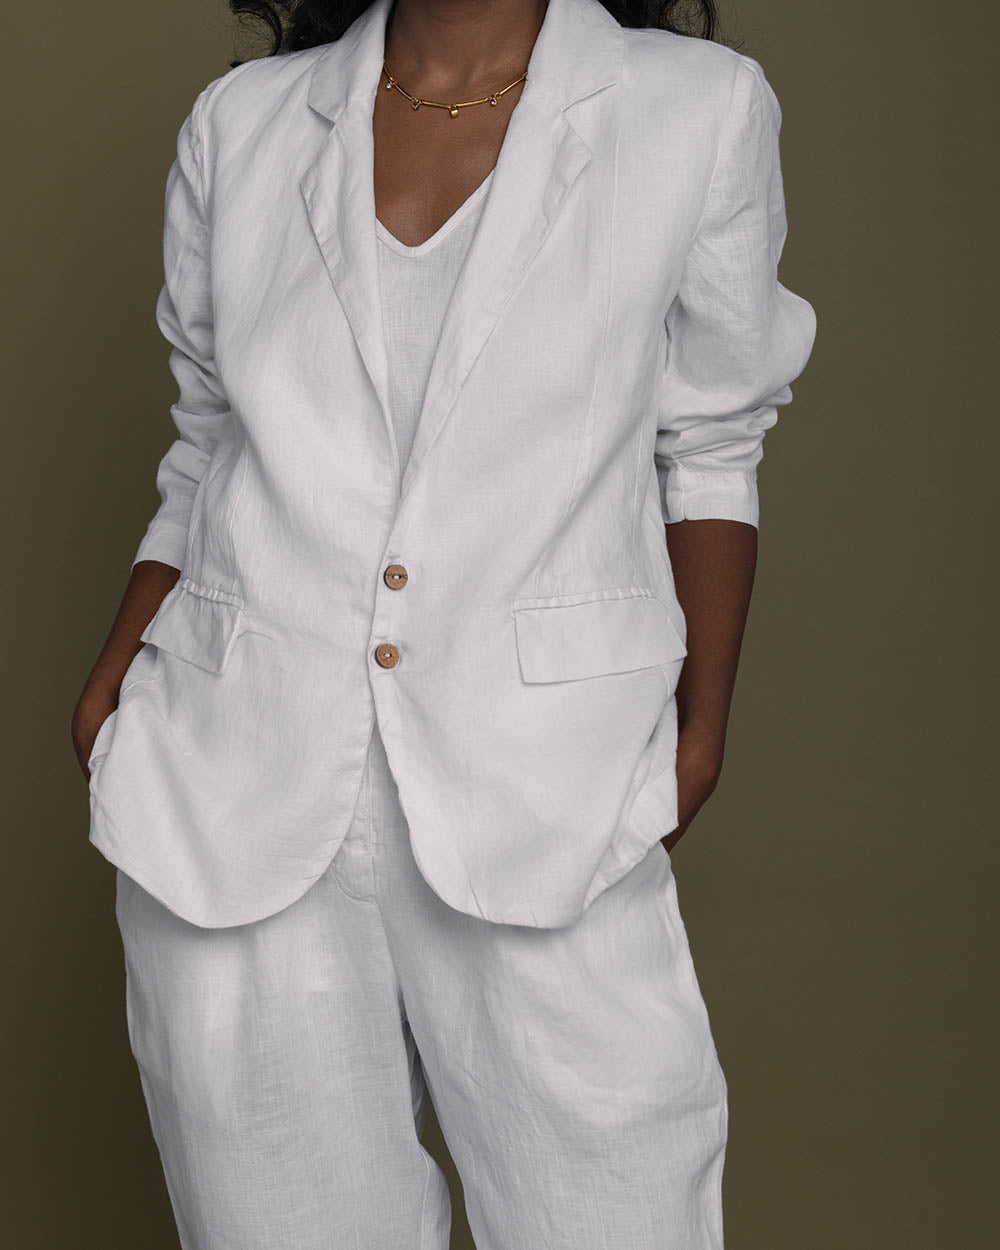 The She’S Everything Blazer - Coconut White at Kamakhyaa by Reistor. This item is Blazers, Casual Wear, Hemp, Natural, Office Wear, Solids, White, Womenswear